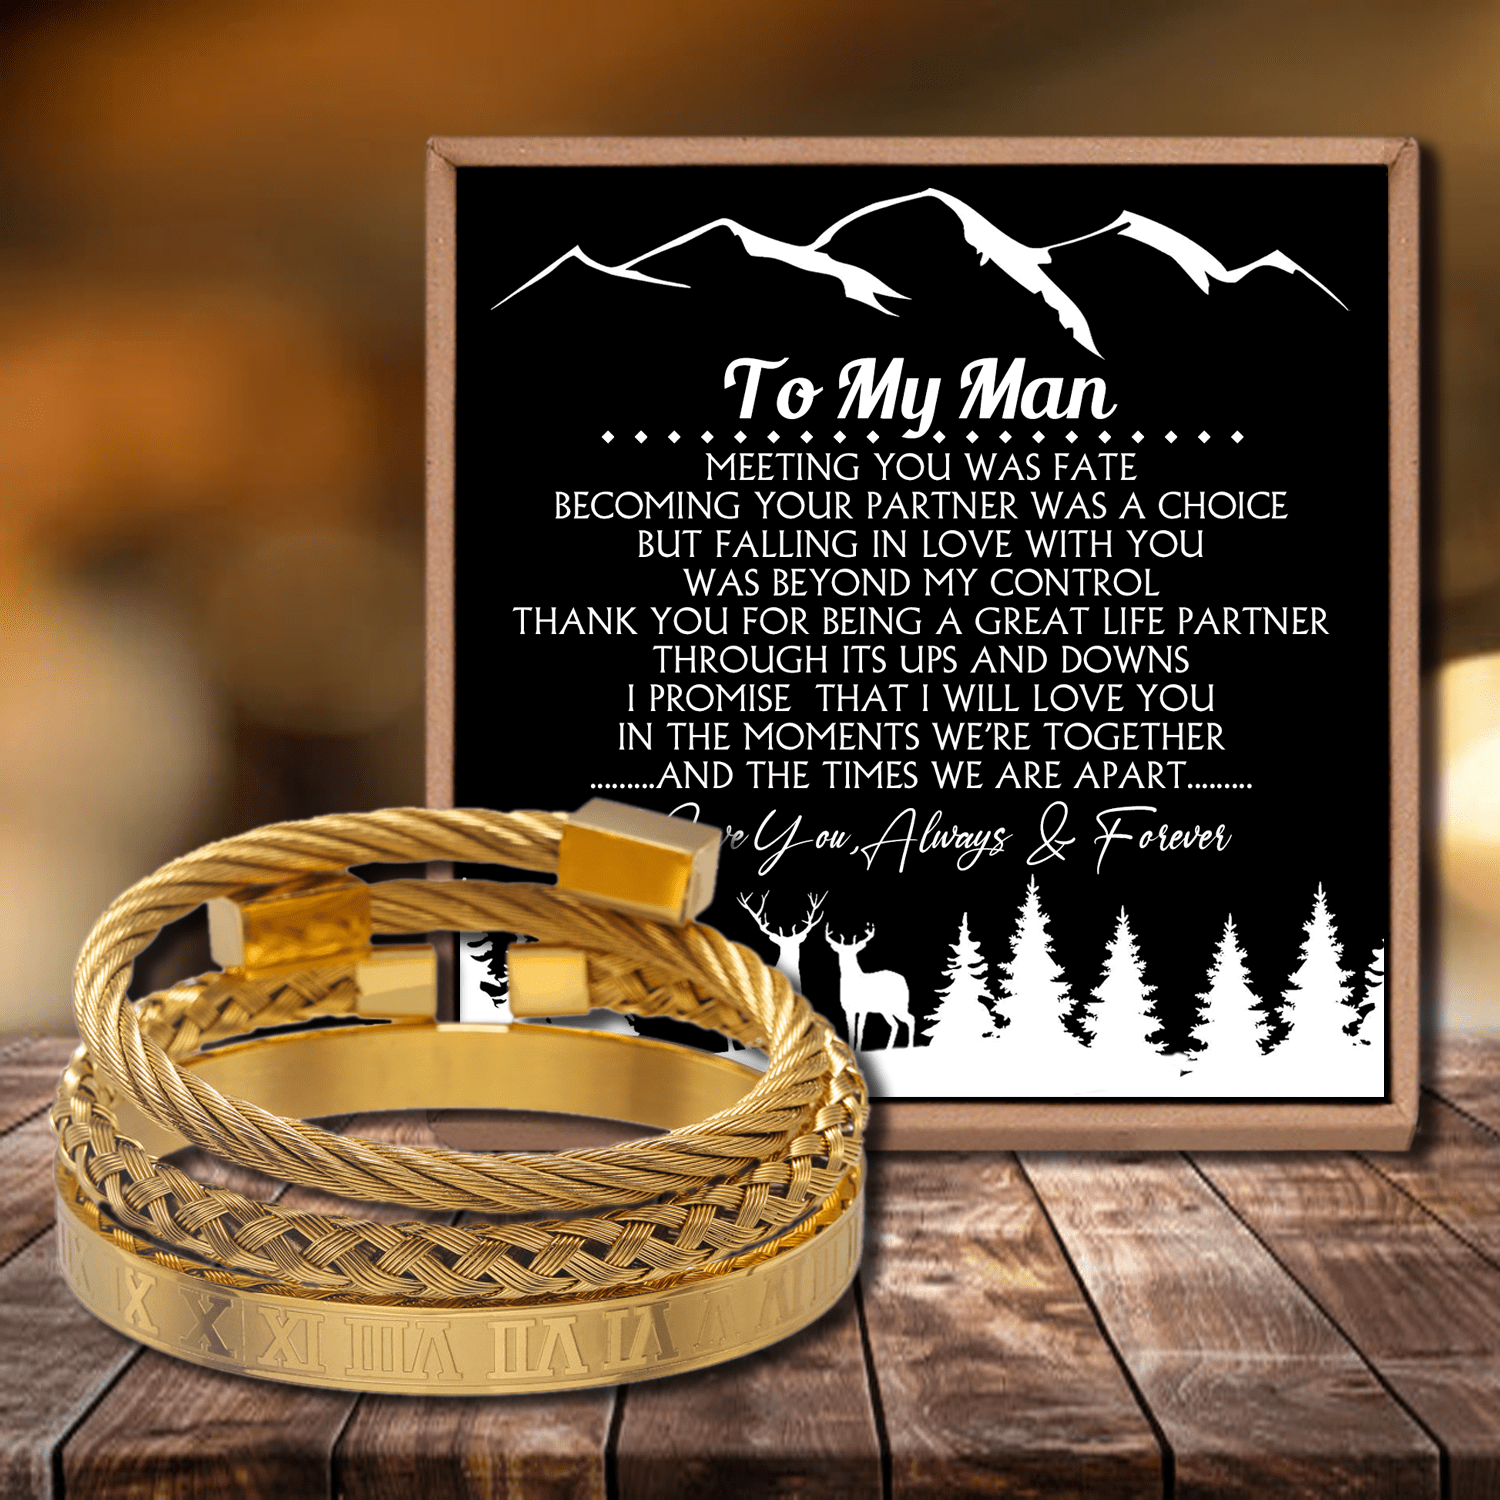 Bracelets To My Man - Meeting You Was Fate Roman Numeral Bracelet Set Gold GiveMe-Gifts